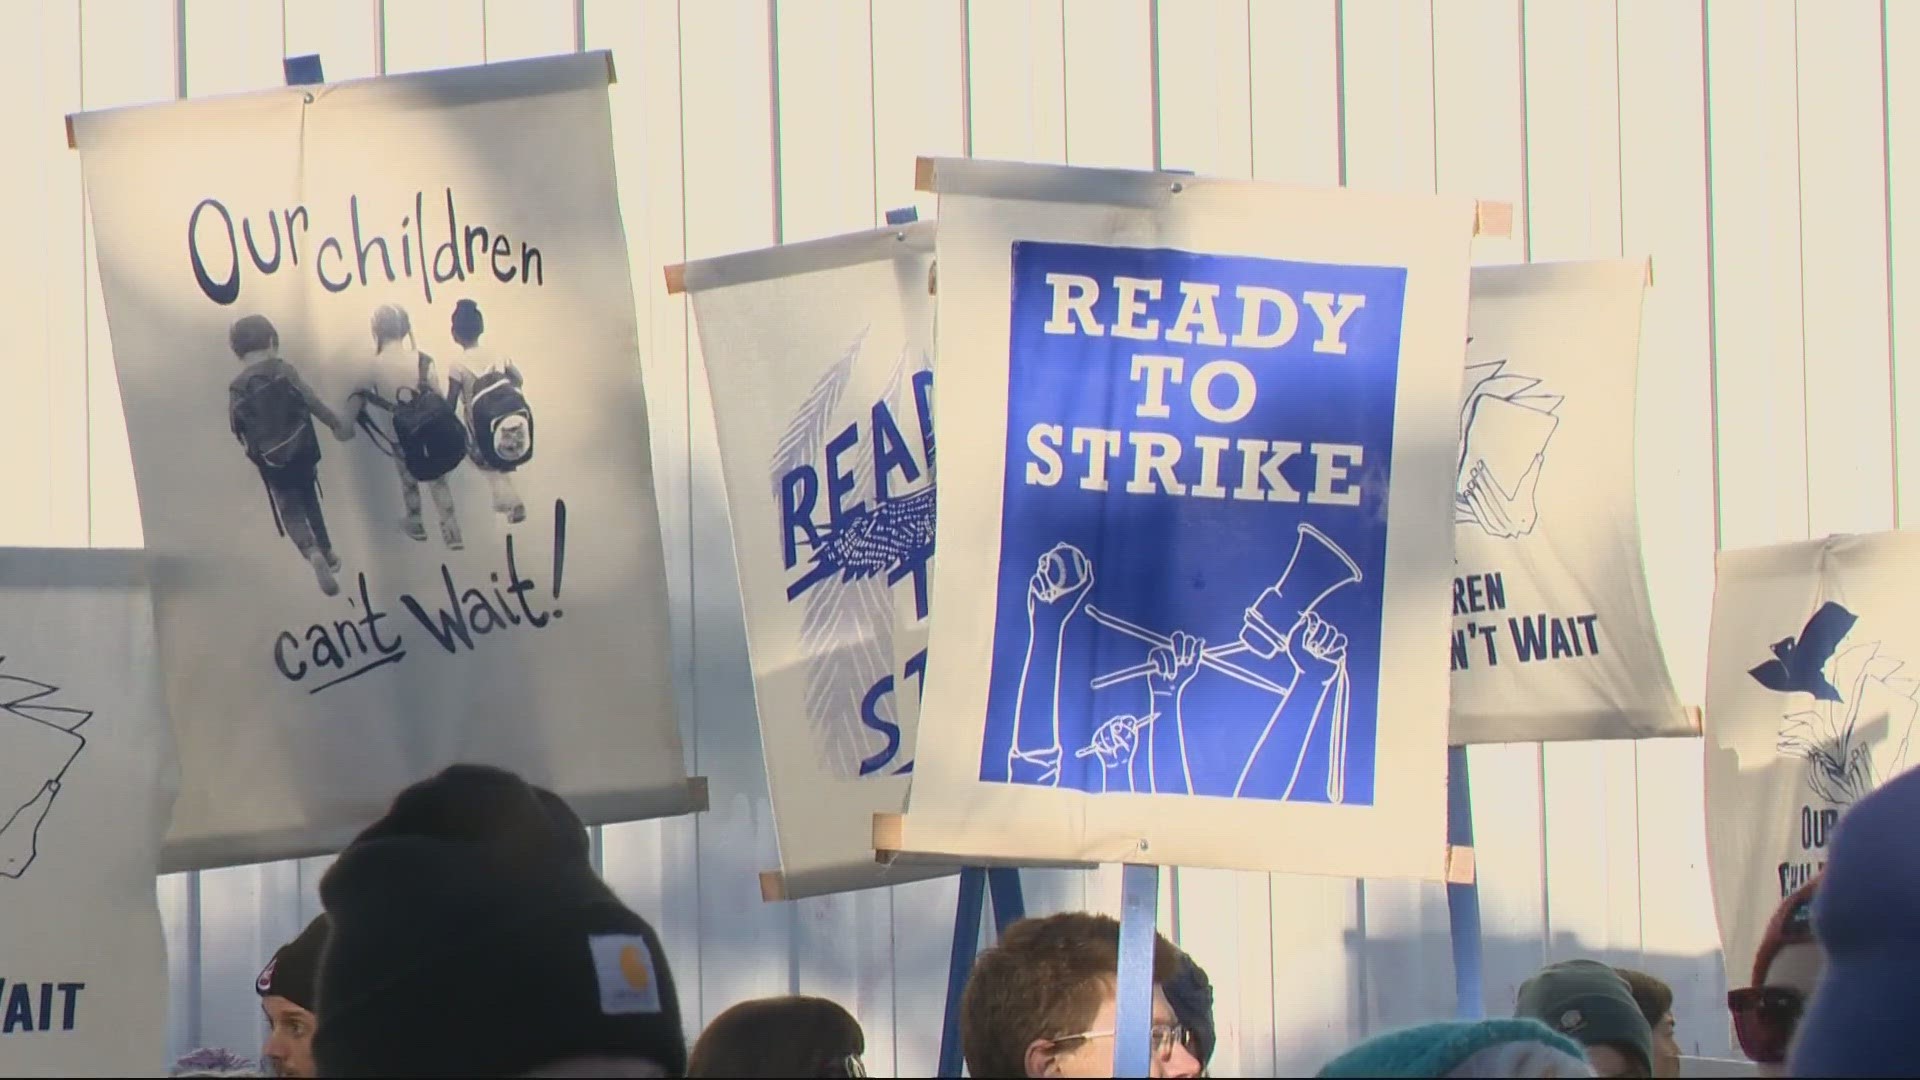 A teacher strike is scheduled to begin Wednesday if a deal is not reached between the district and teachers union.